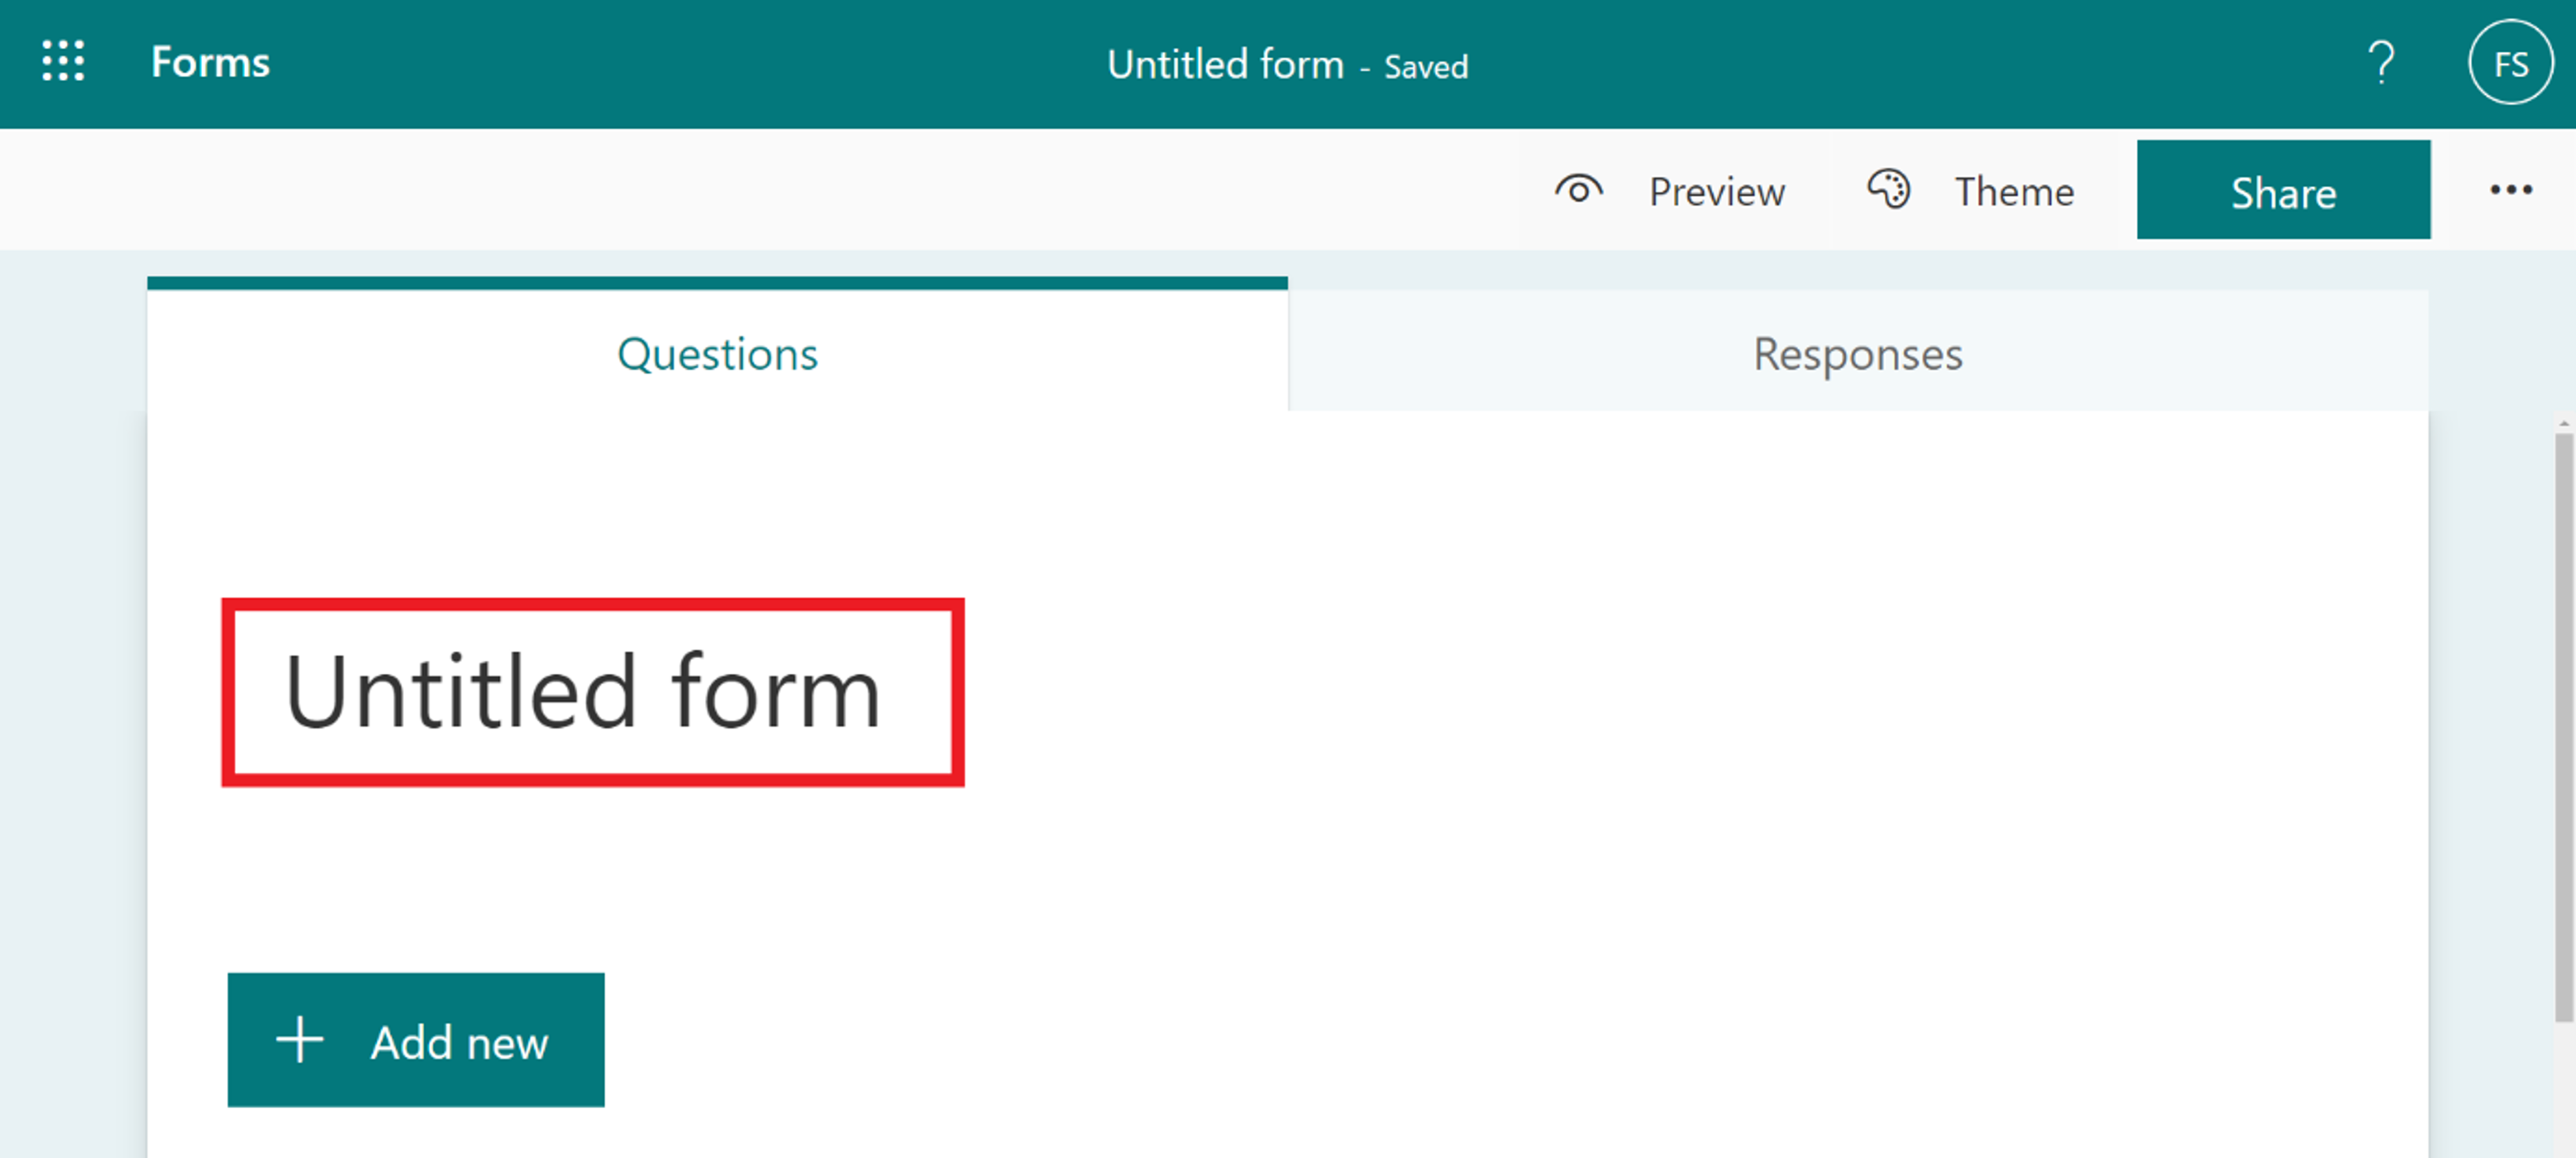 new form create - select utitled form to change title